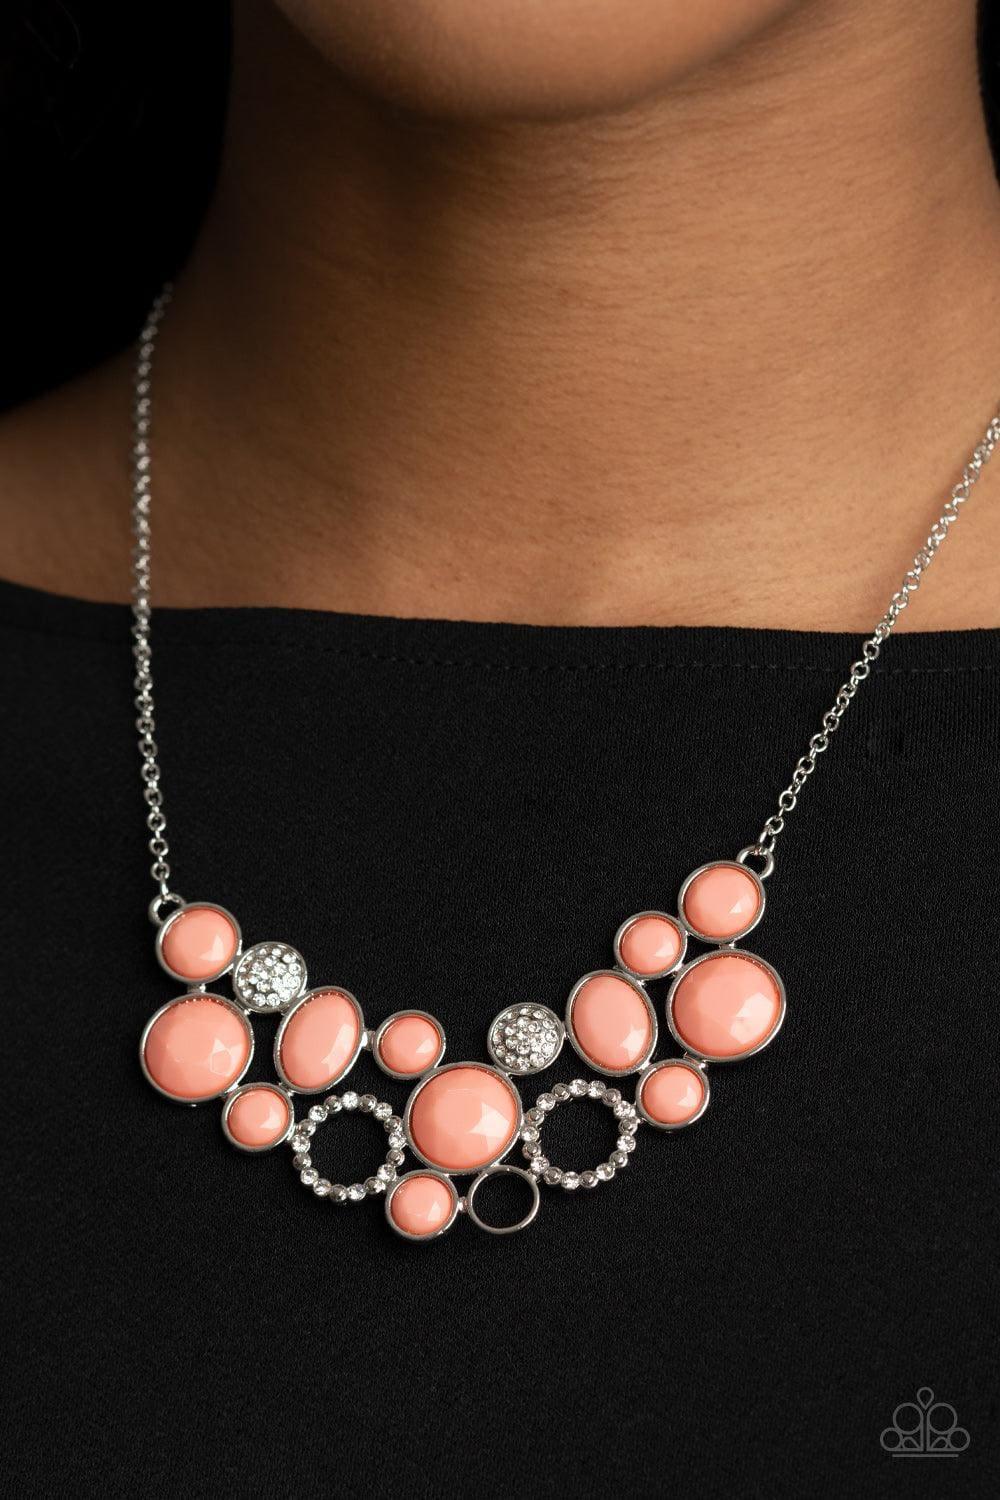 Paparazzi Accessories - Extra Eloquent - Orange (coral) Necklace - Bling by JessieK